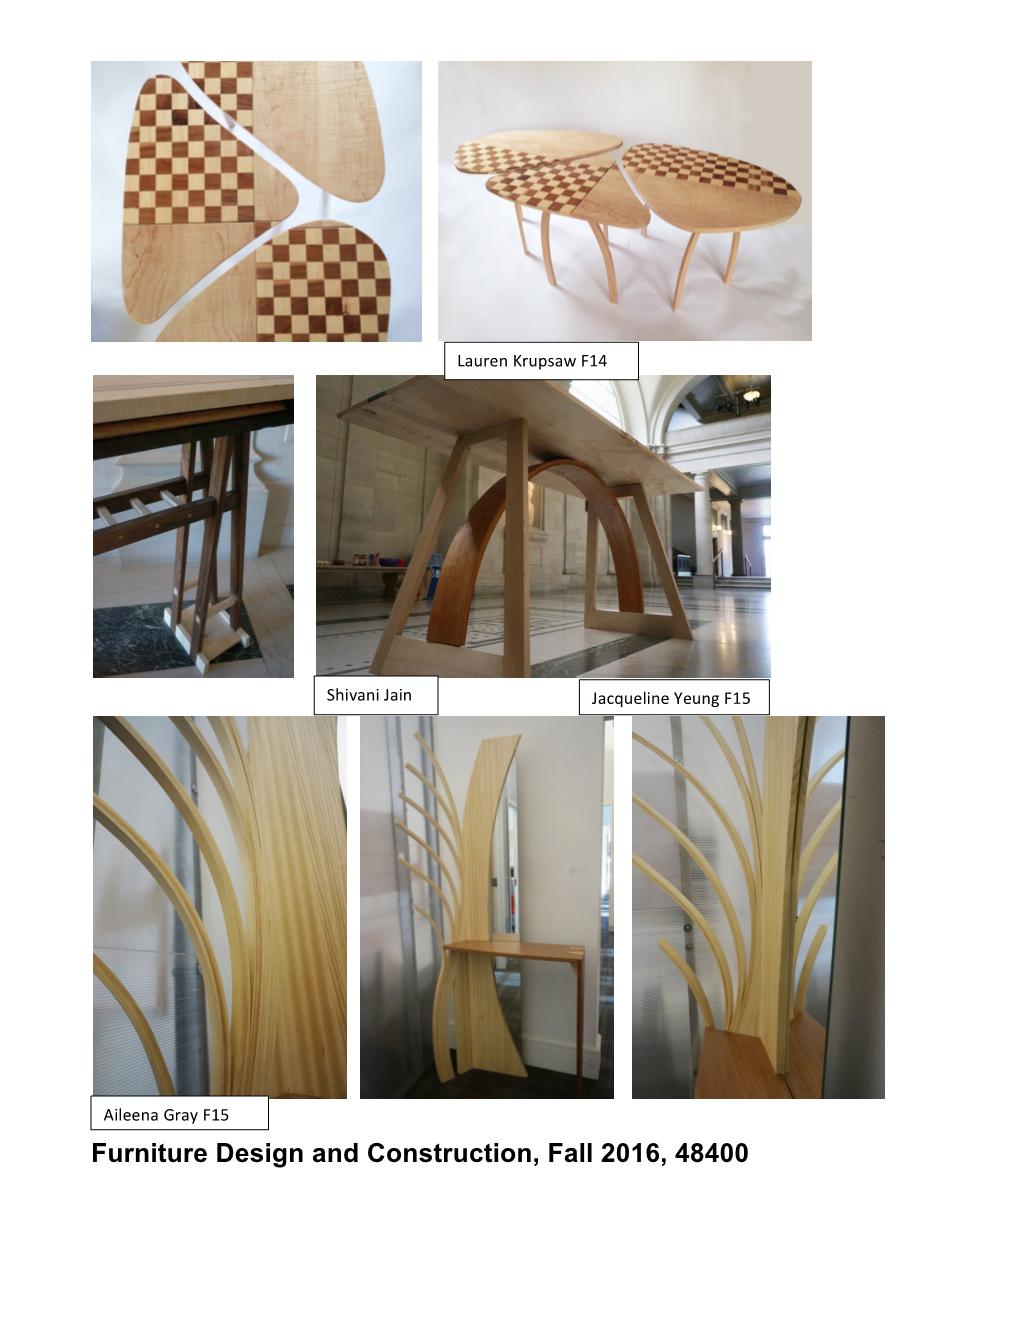 Furniture Design and Construction, Fall 2016, 48400